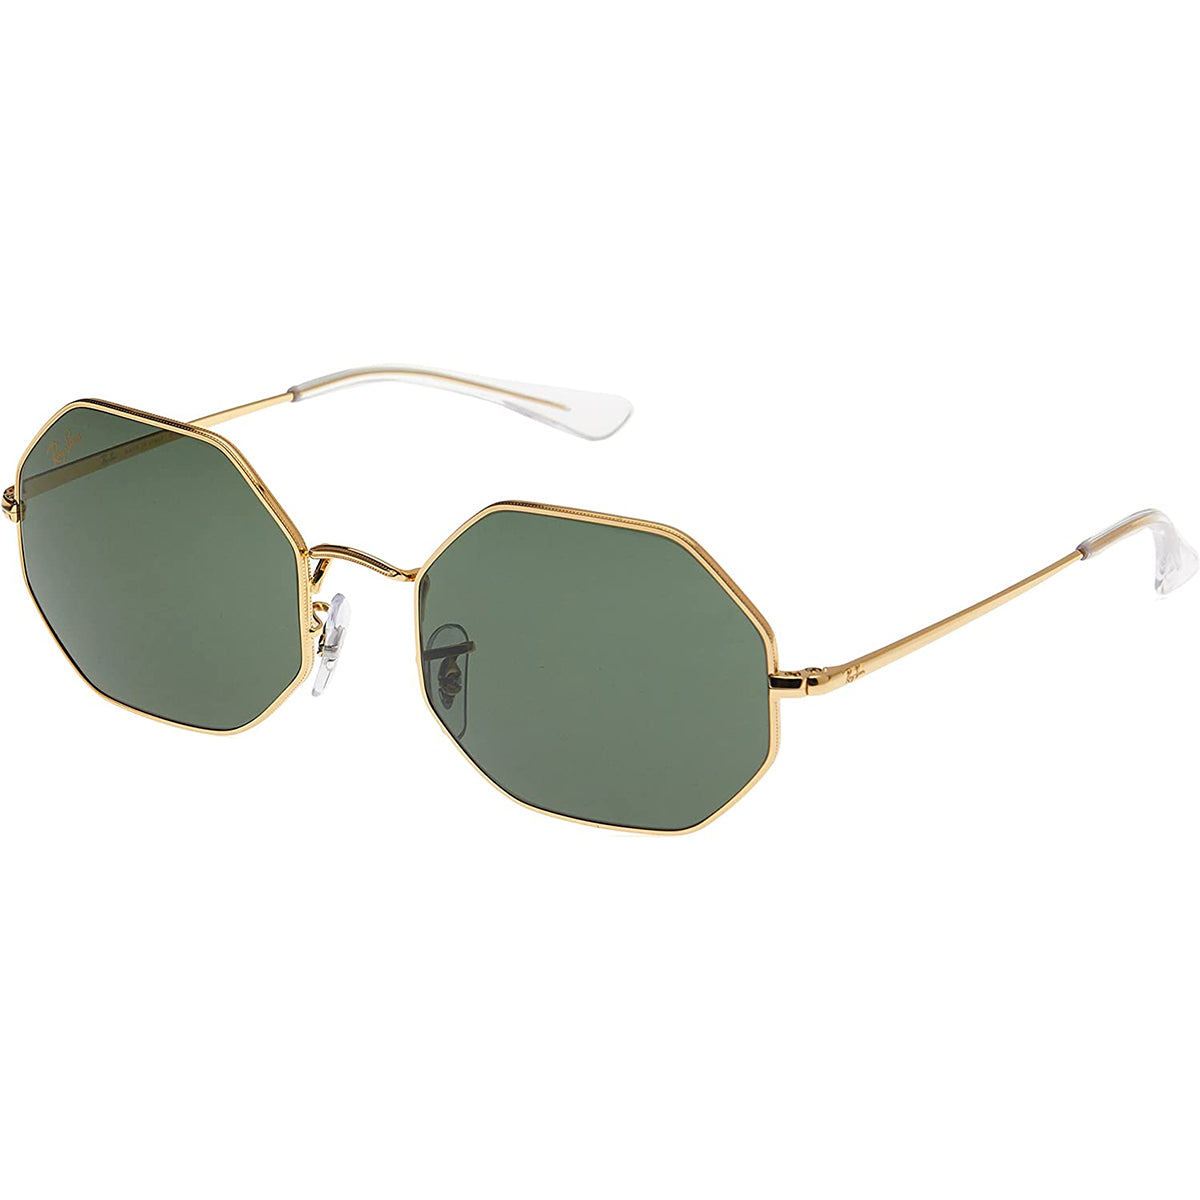 Ray-Ban Octagon 1972 Legend Gold Adult Wireframe Sunglasses-0RB1972